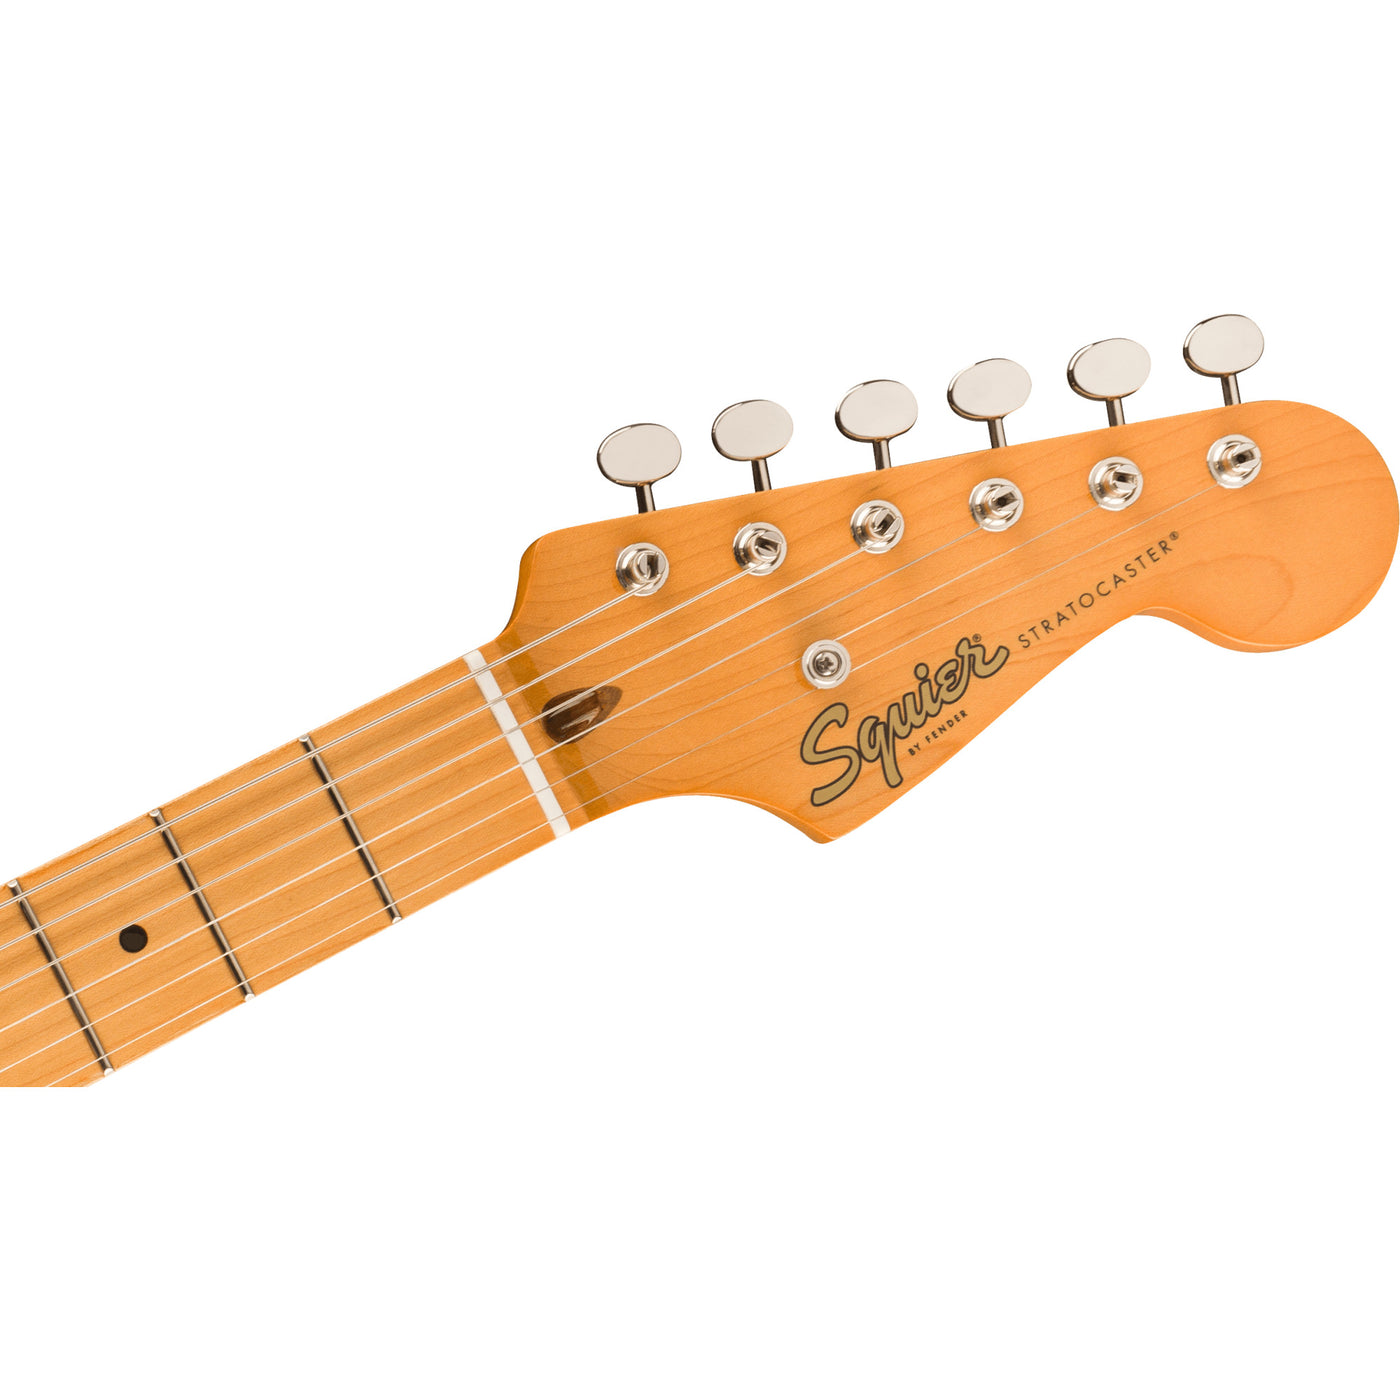 Fender Classic Vibe '50s Stratocaster Electric Guitar, White Blonde (0374005501)